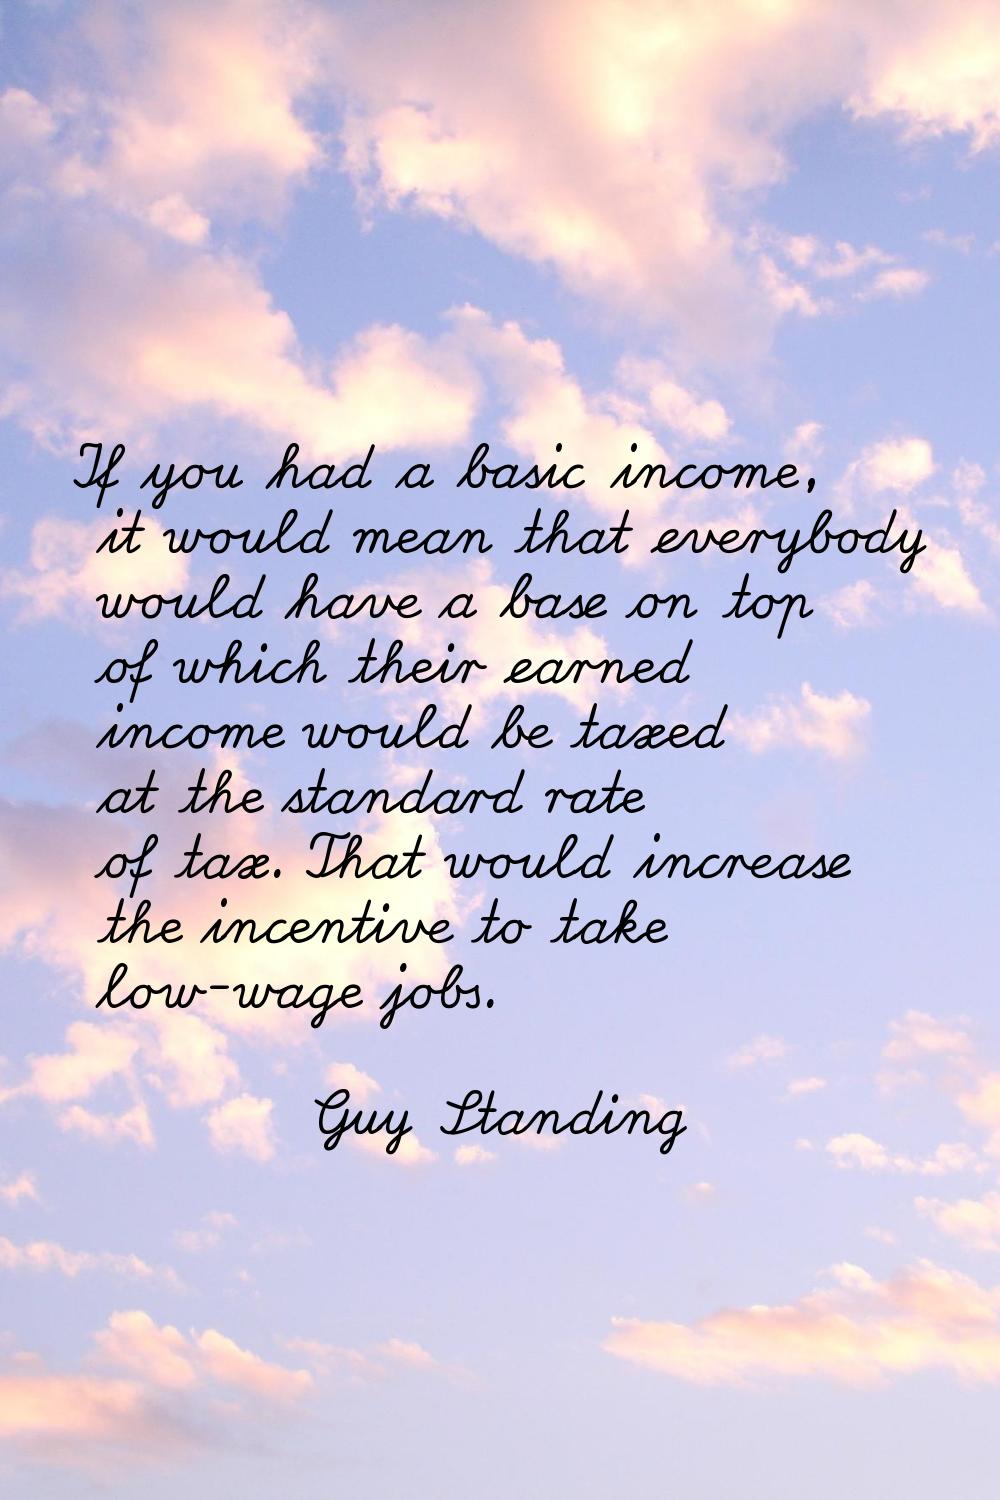 If you had a basic income, it would mean that everybody would have a base on top of which their ear